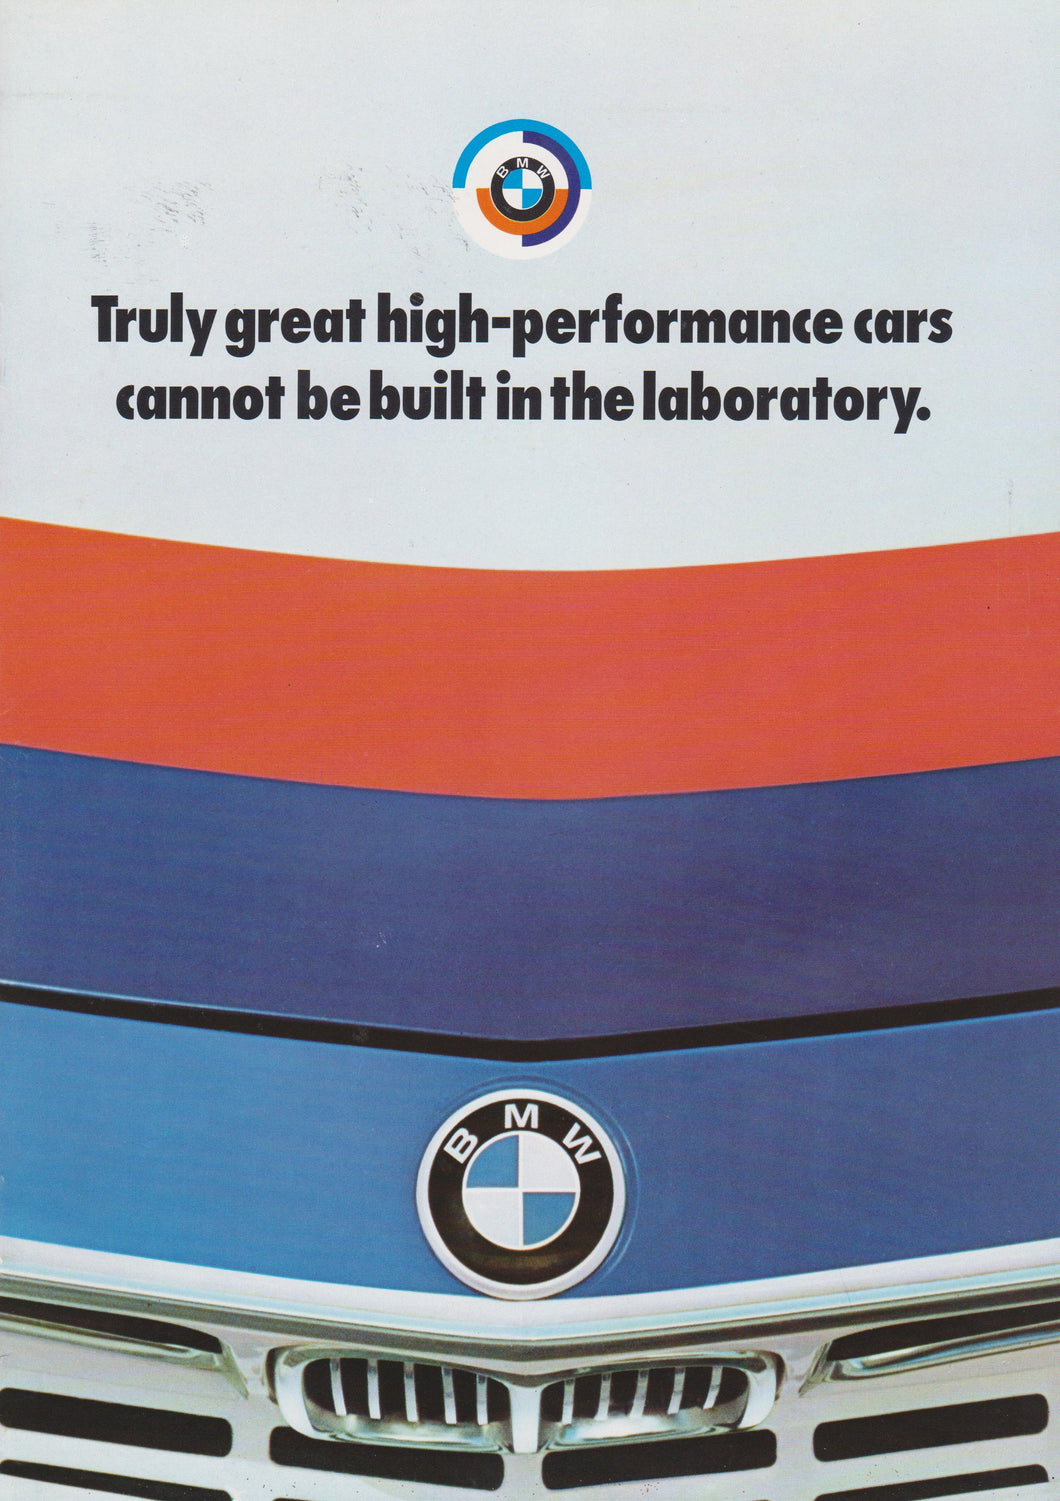 Brochure - Truly Great high-performance cars cannot be built in the laboratory.